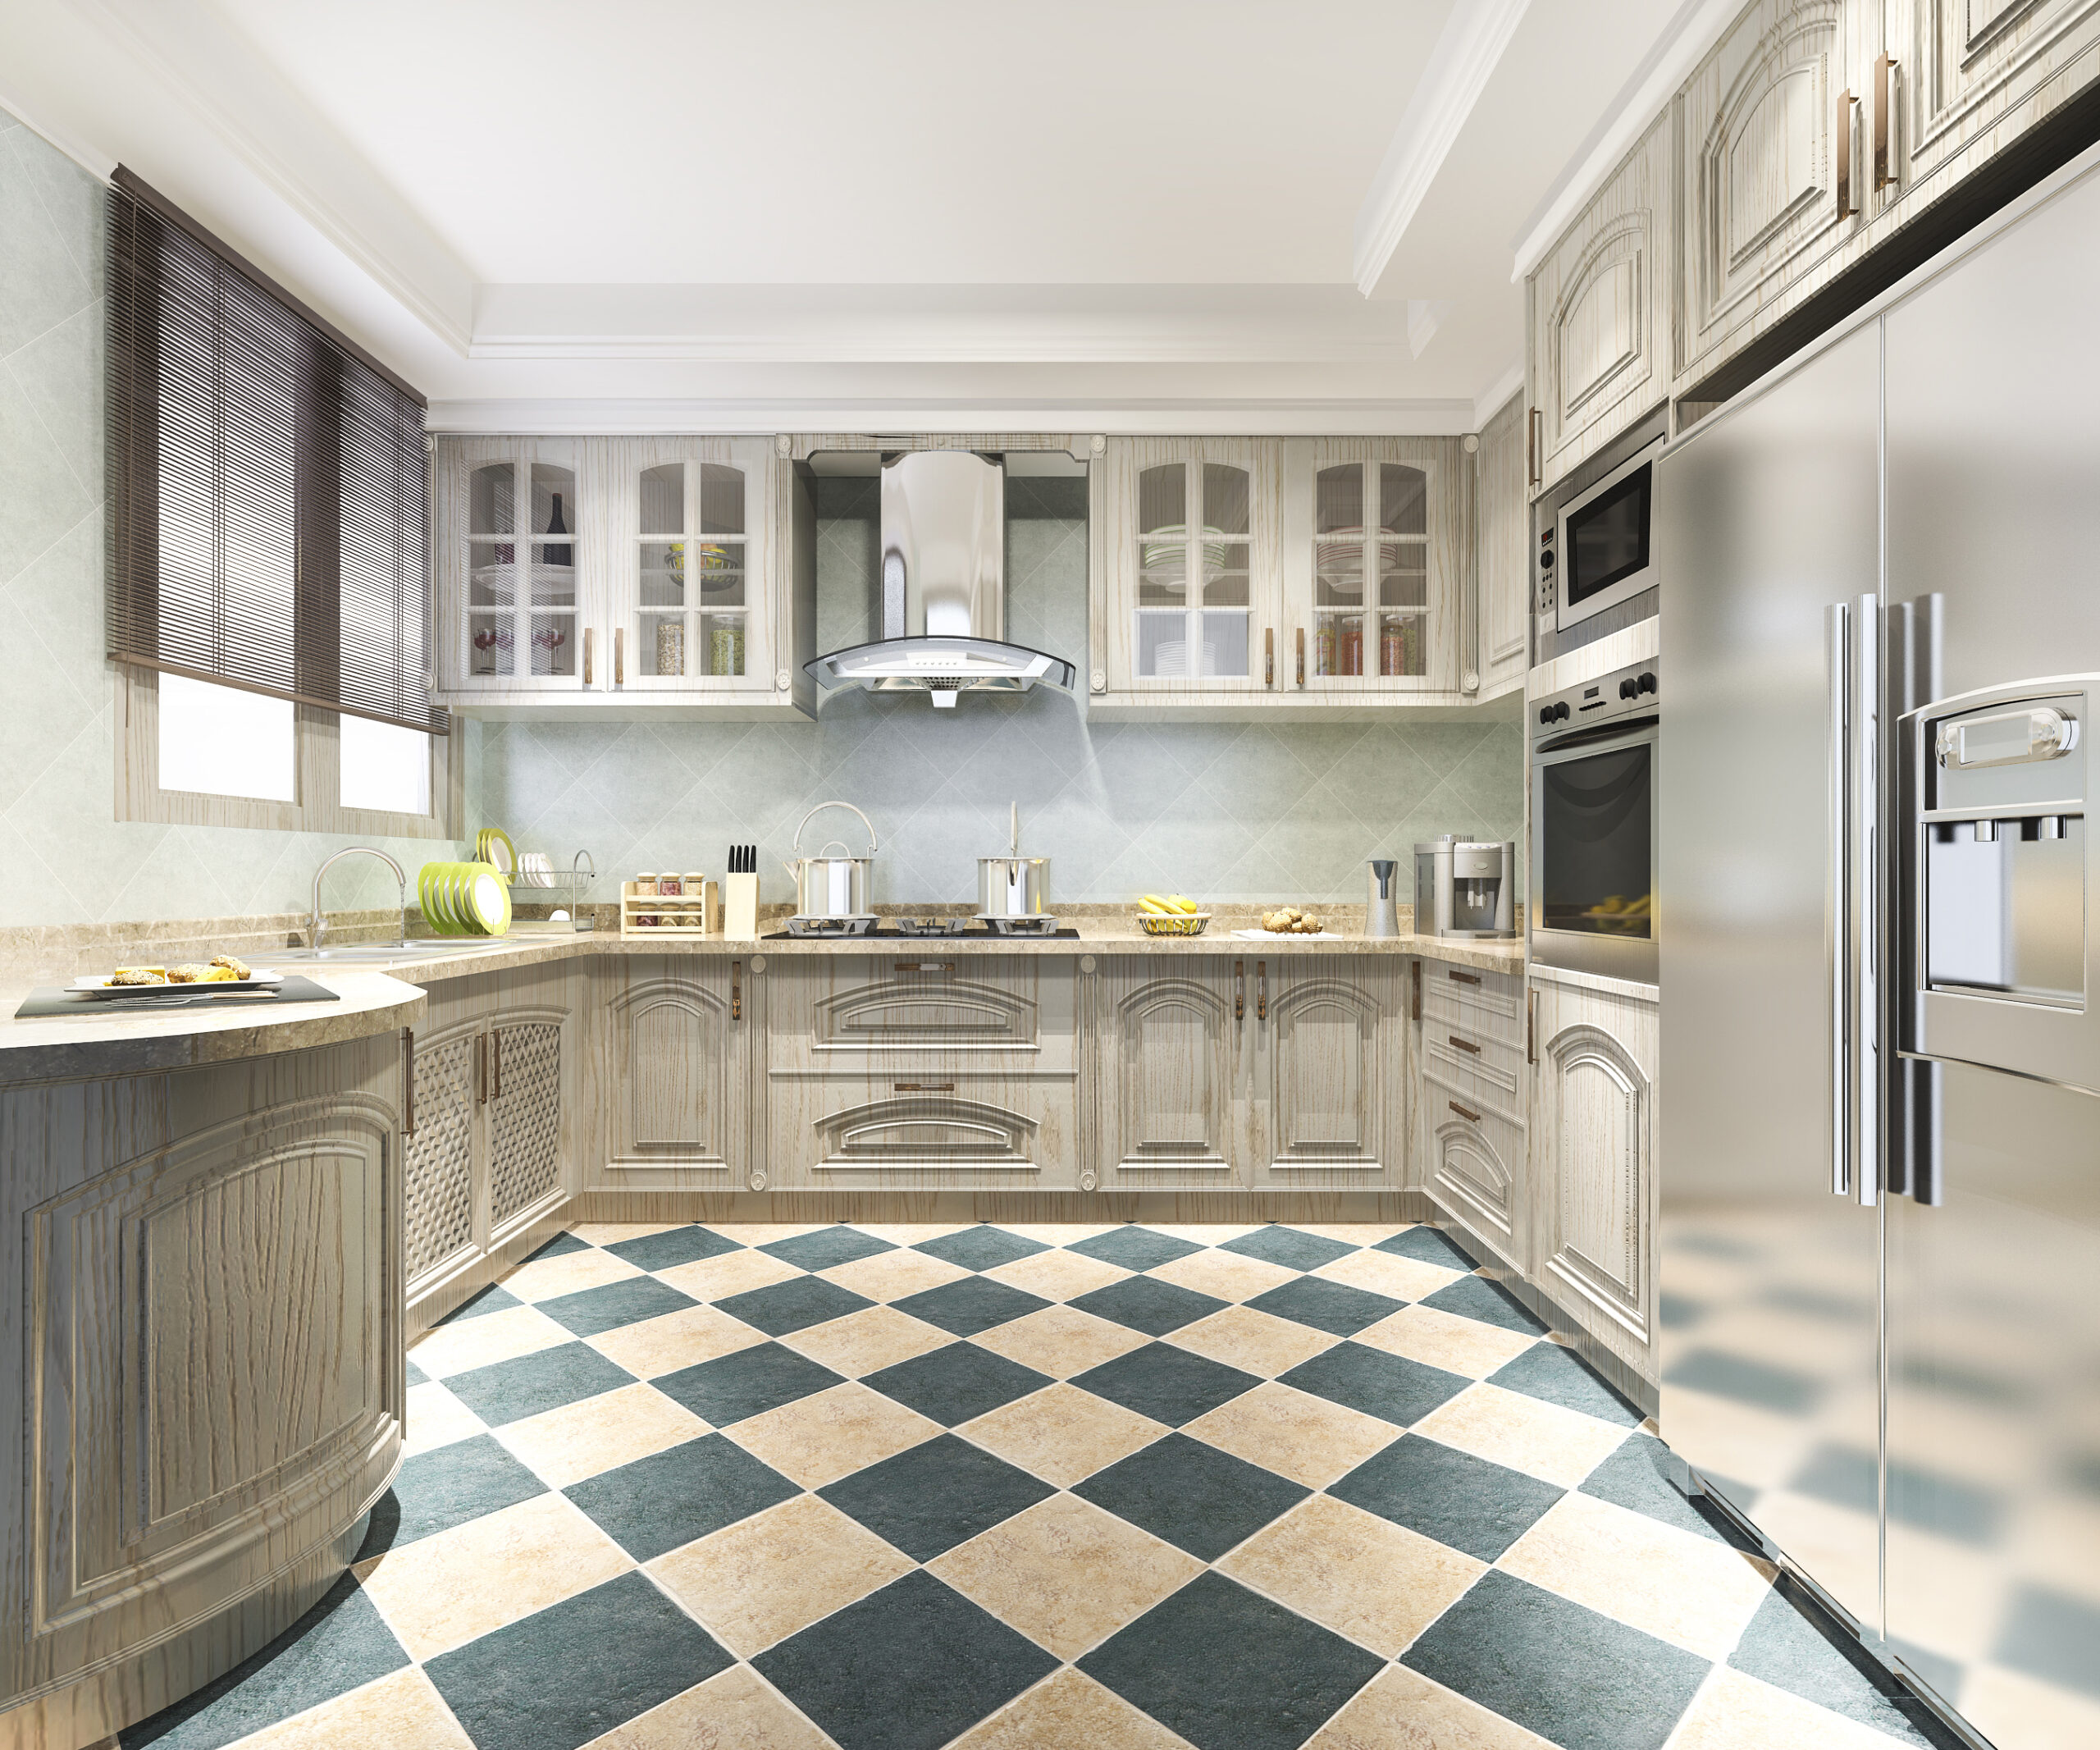 Use checkerboard tiles in kitchens for either a classic or retro look.